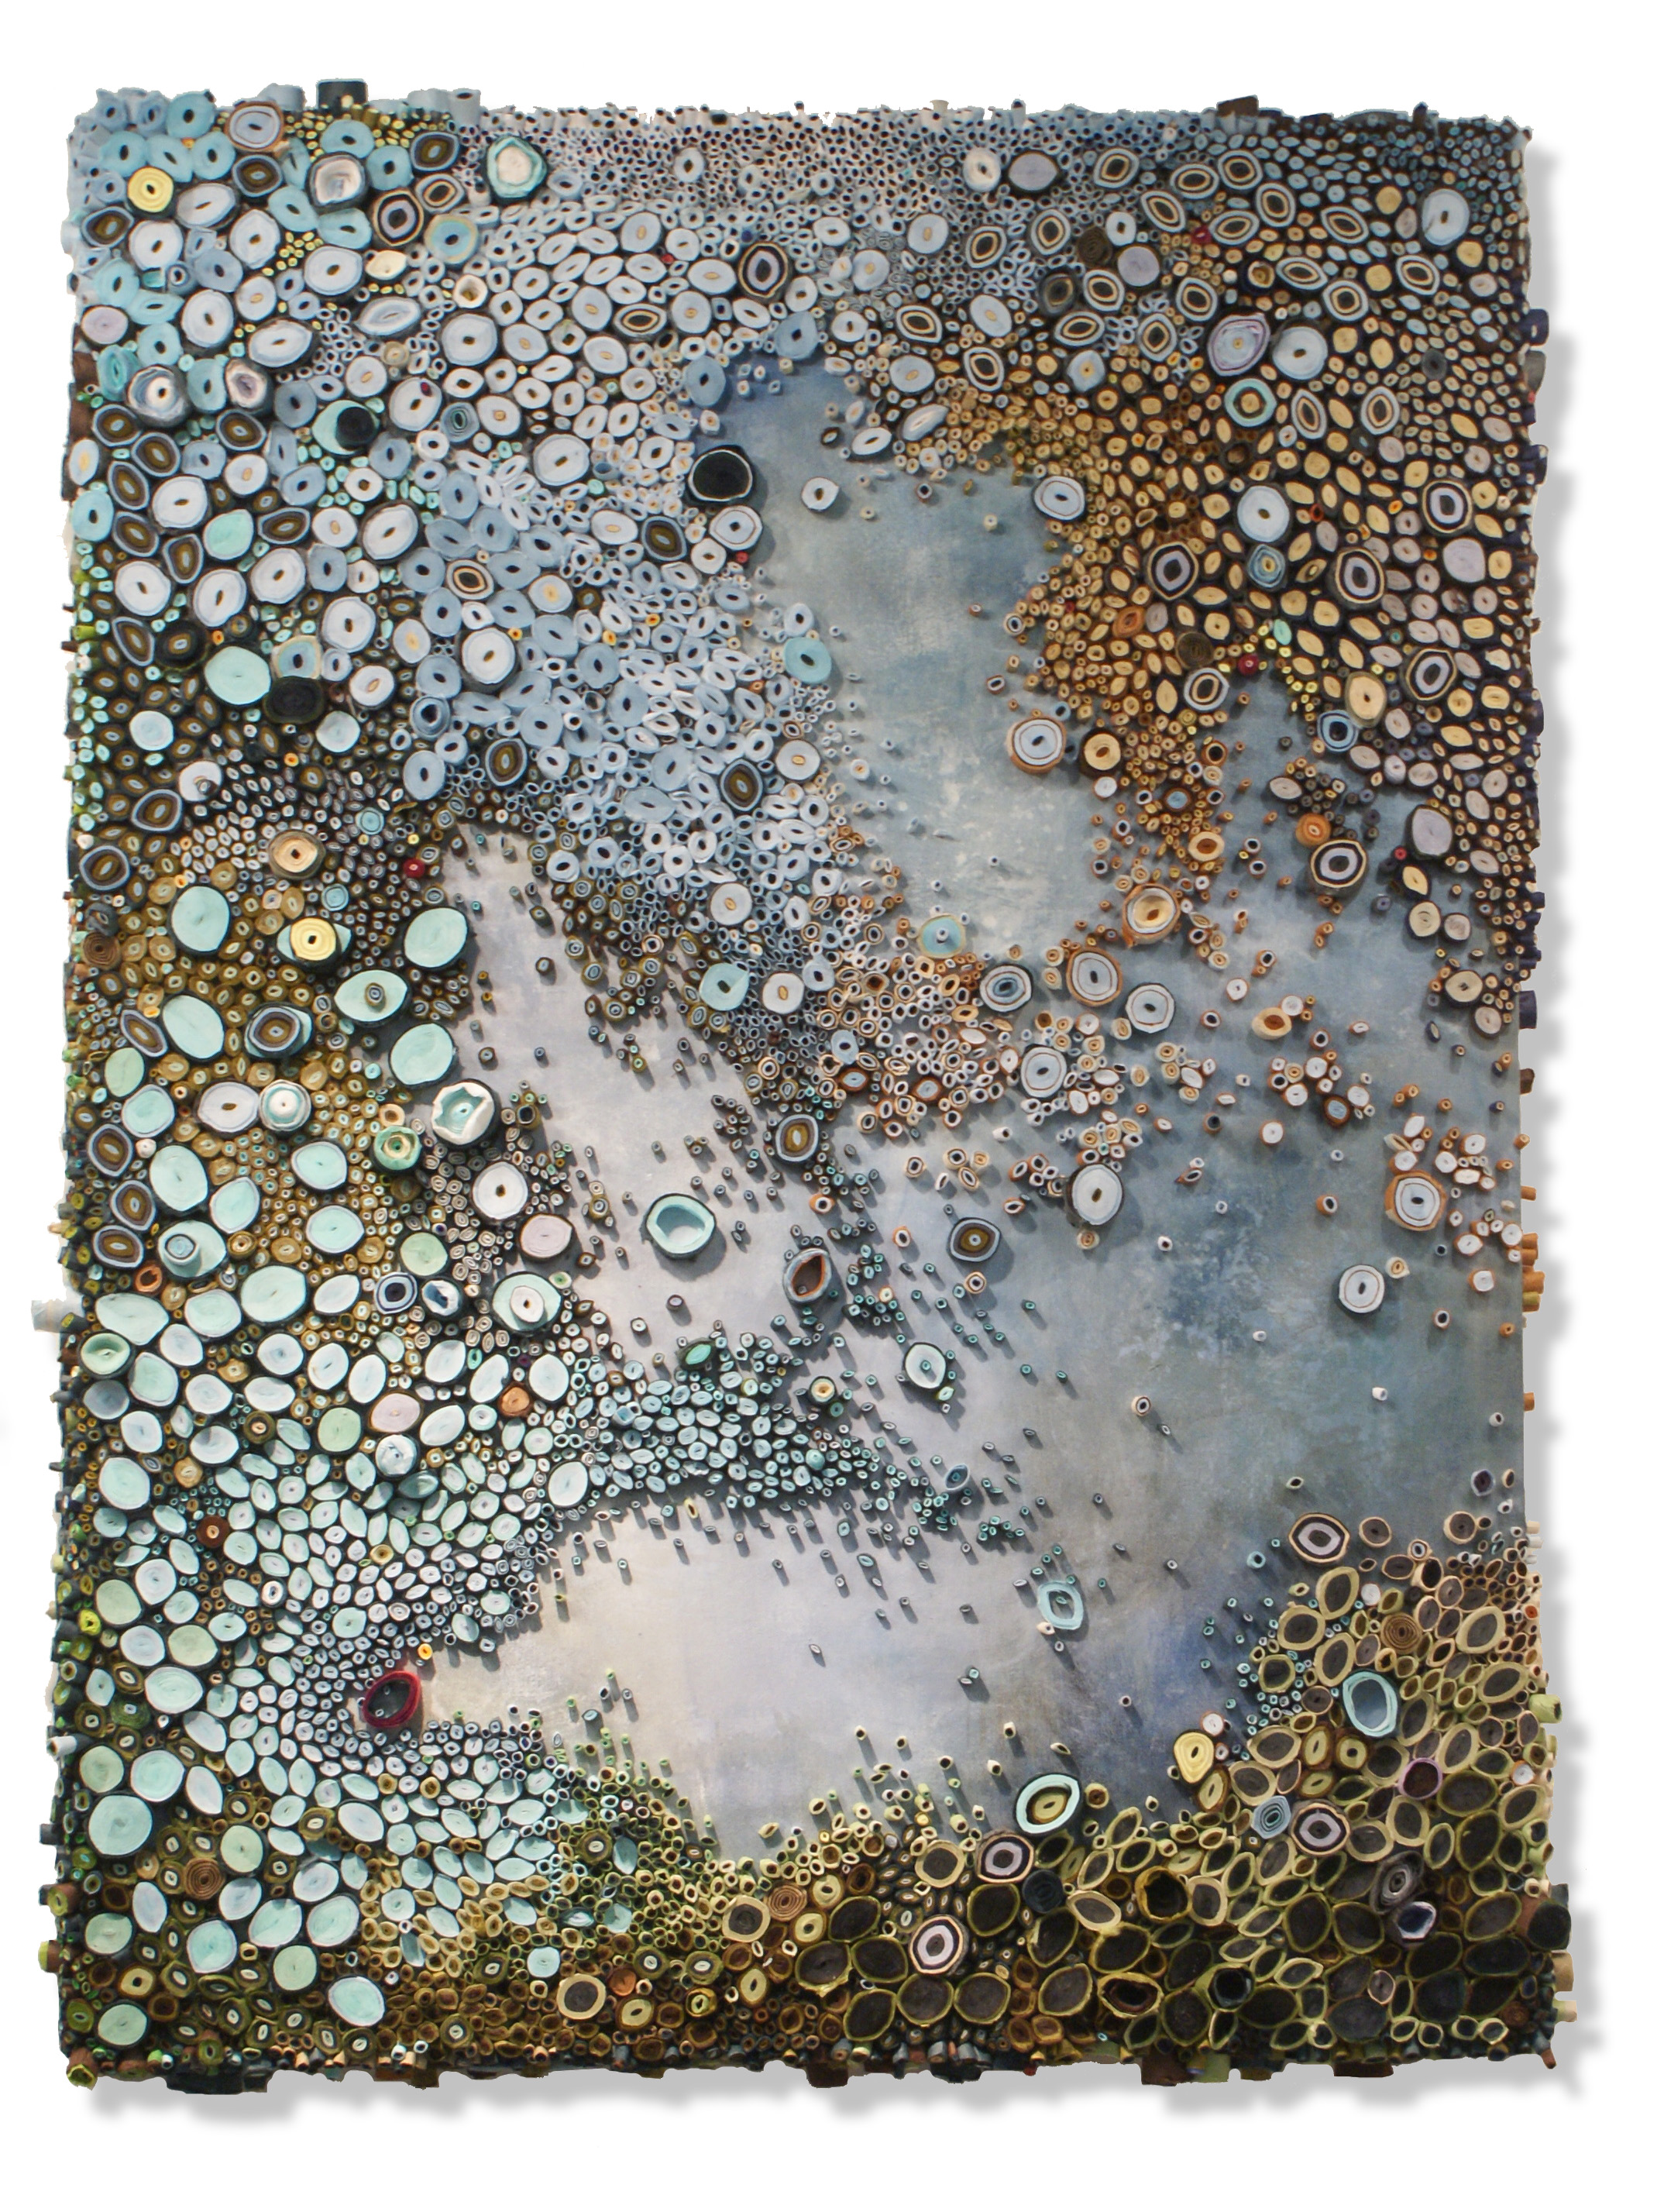 Amy Genser – Prince of Tides / Dimensional paper collages